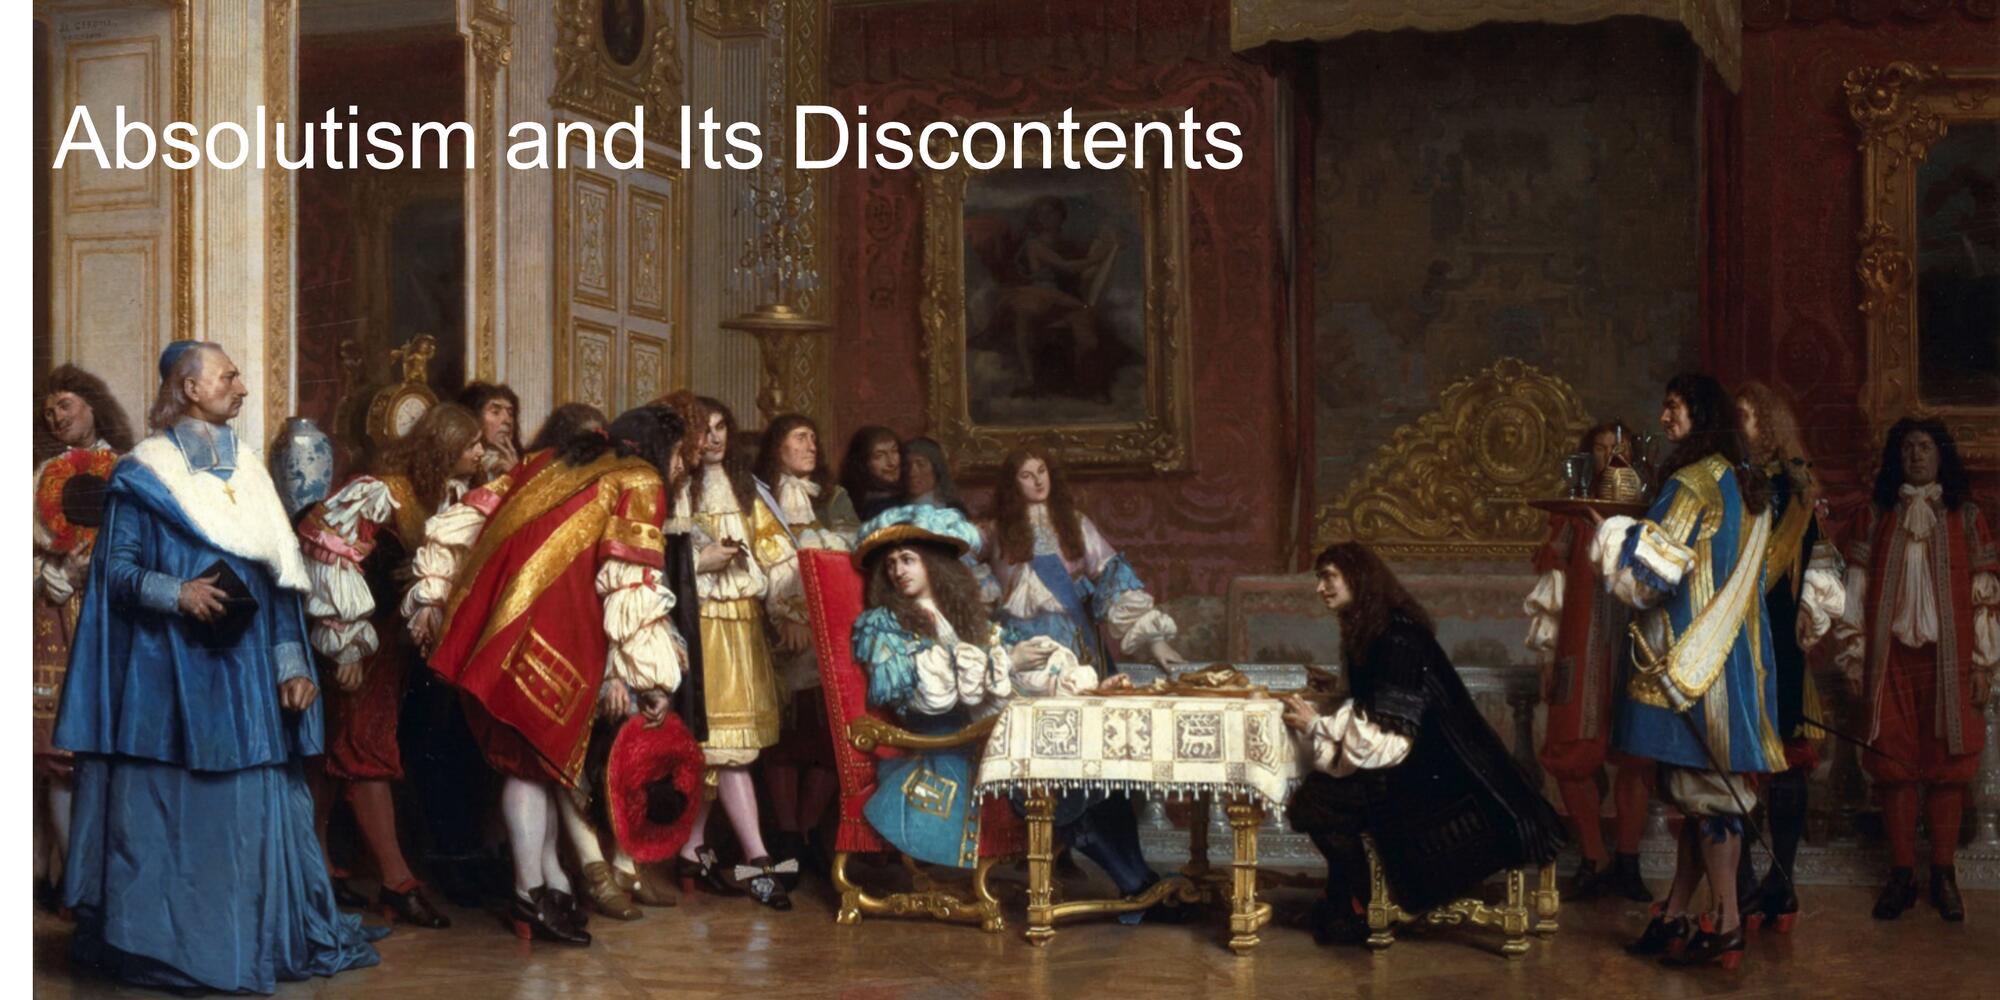 Absolutism and Its Discontents